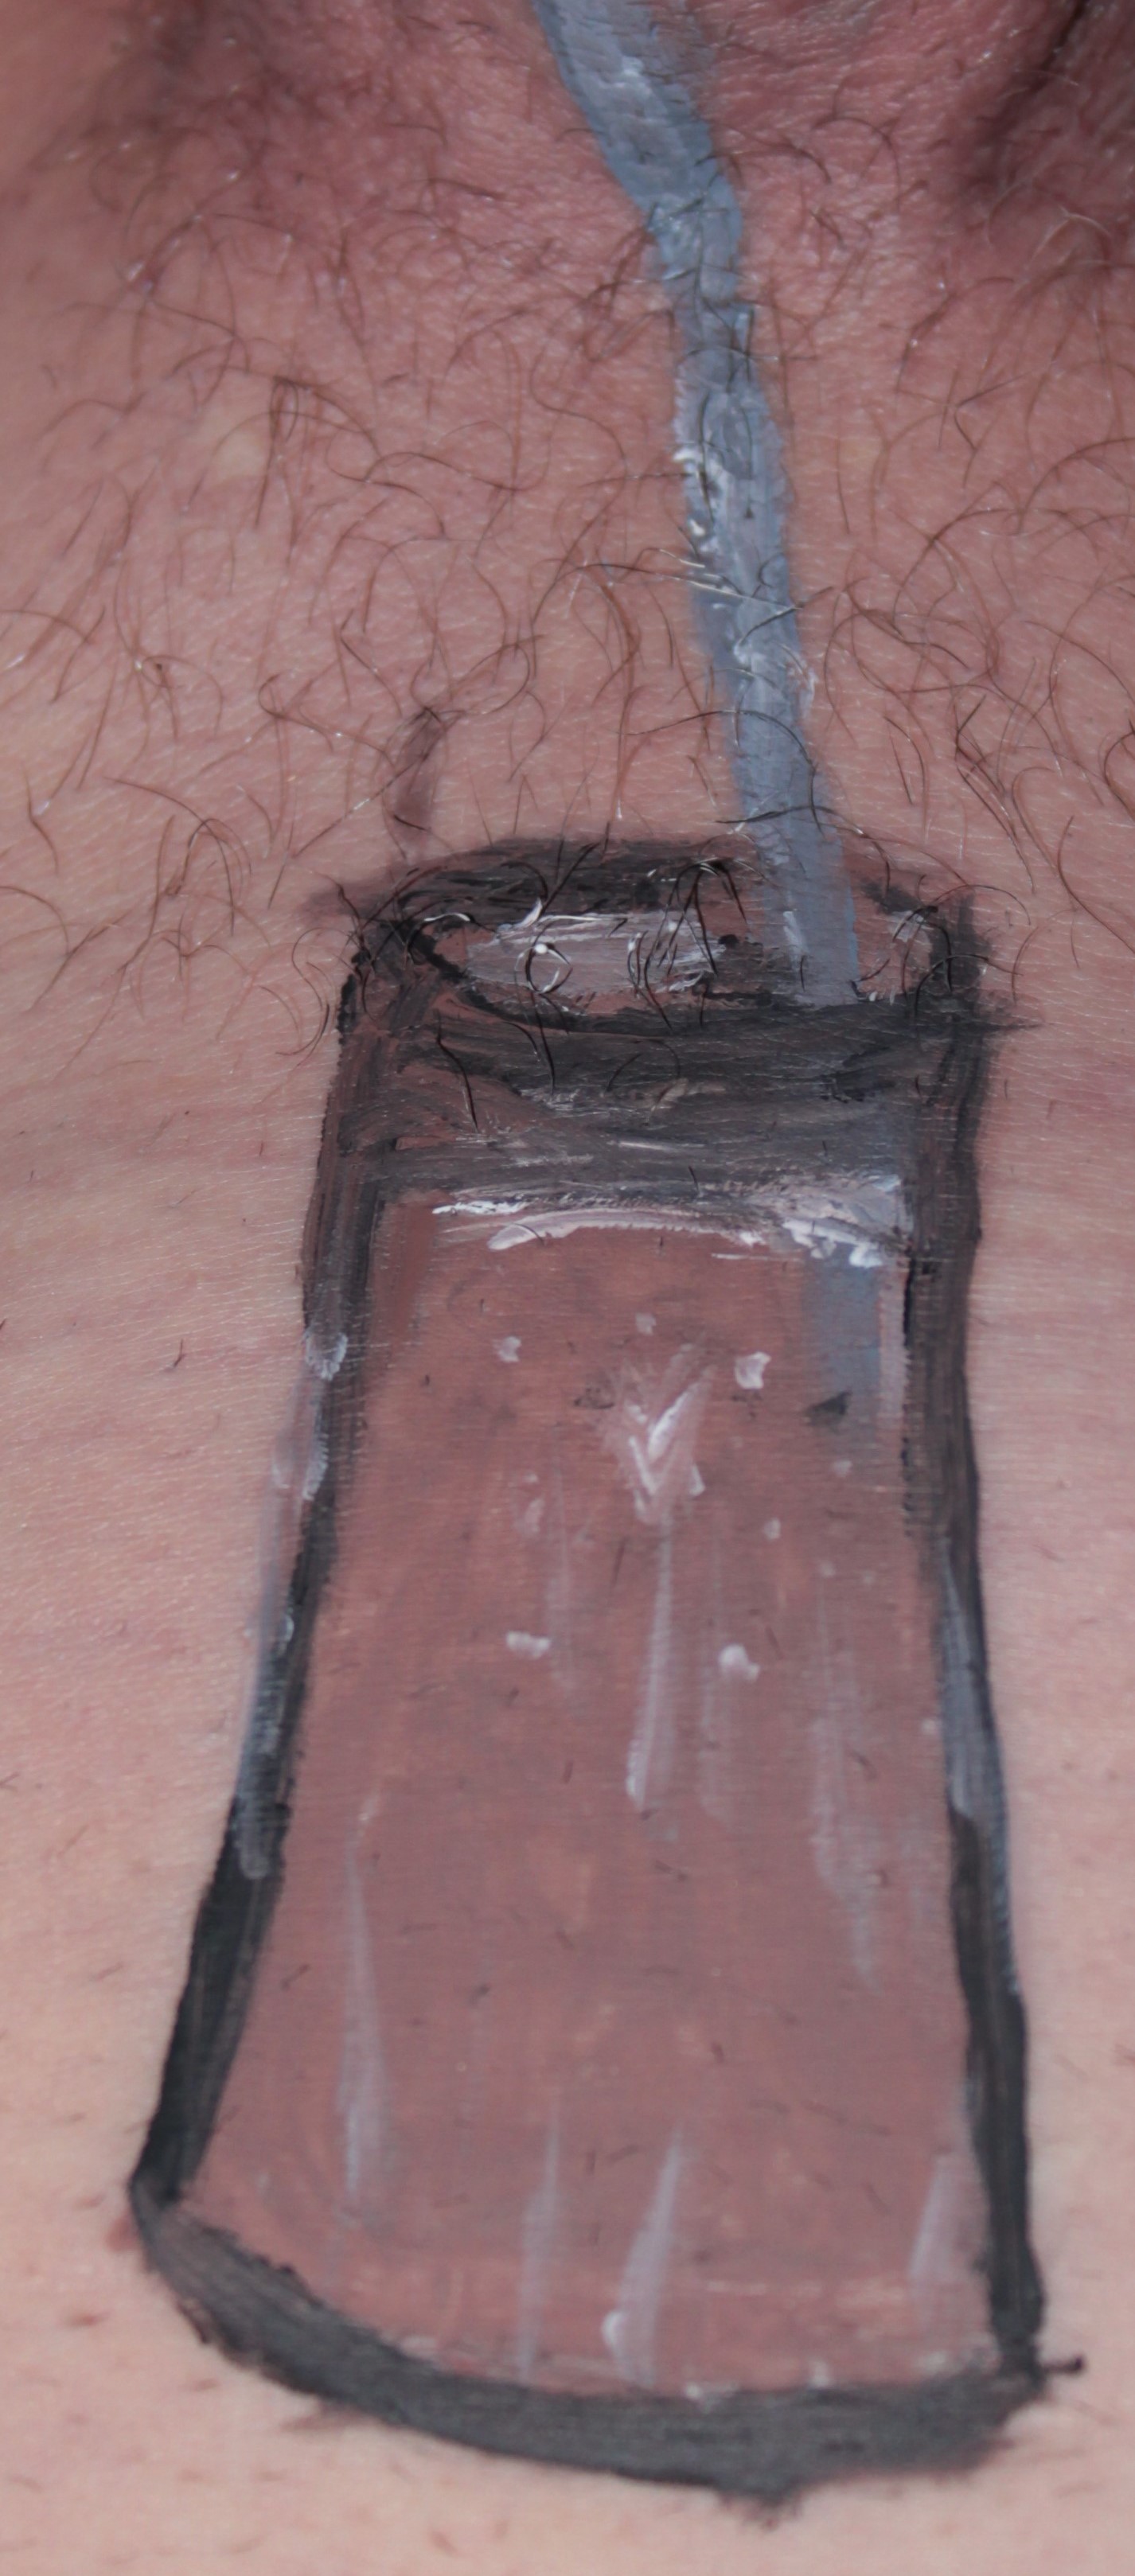 glass of soda painted on male's stomach, upside down, so the straw goes up along the penis